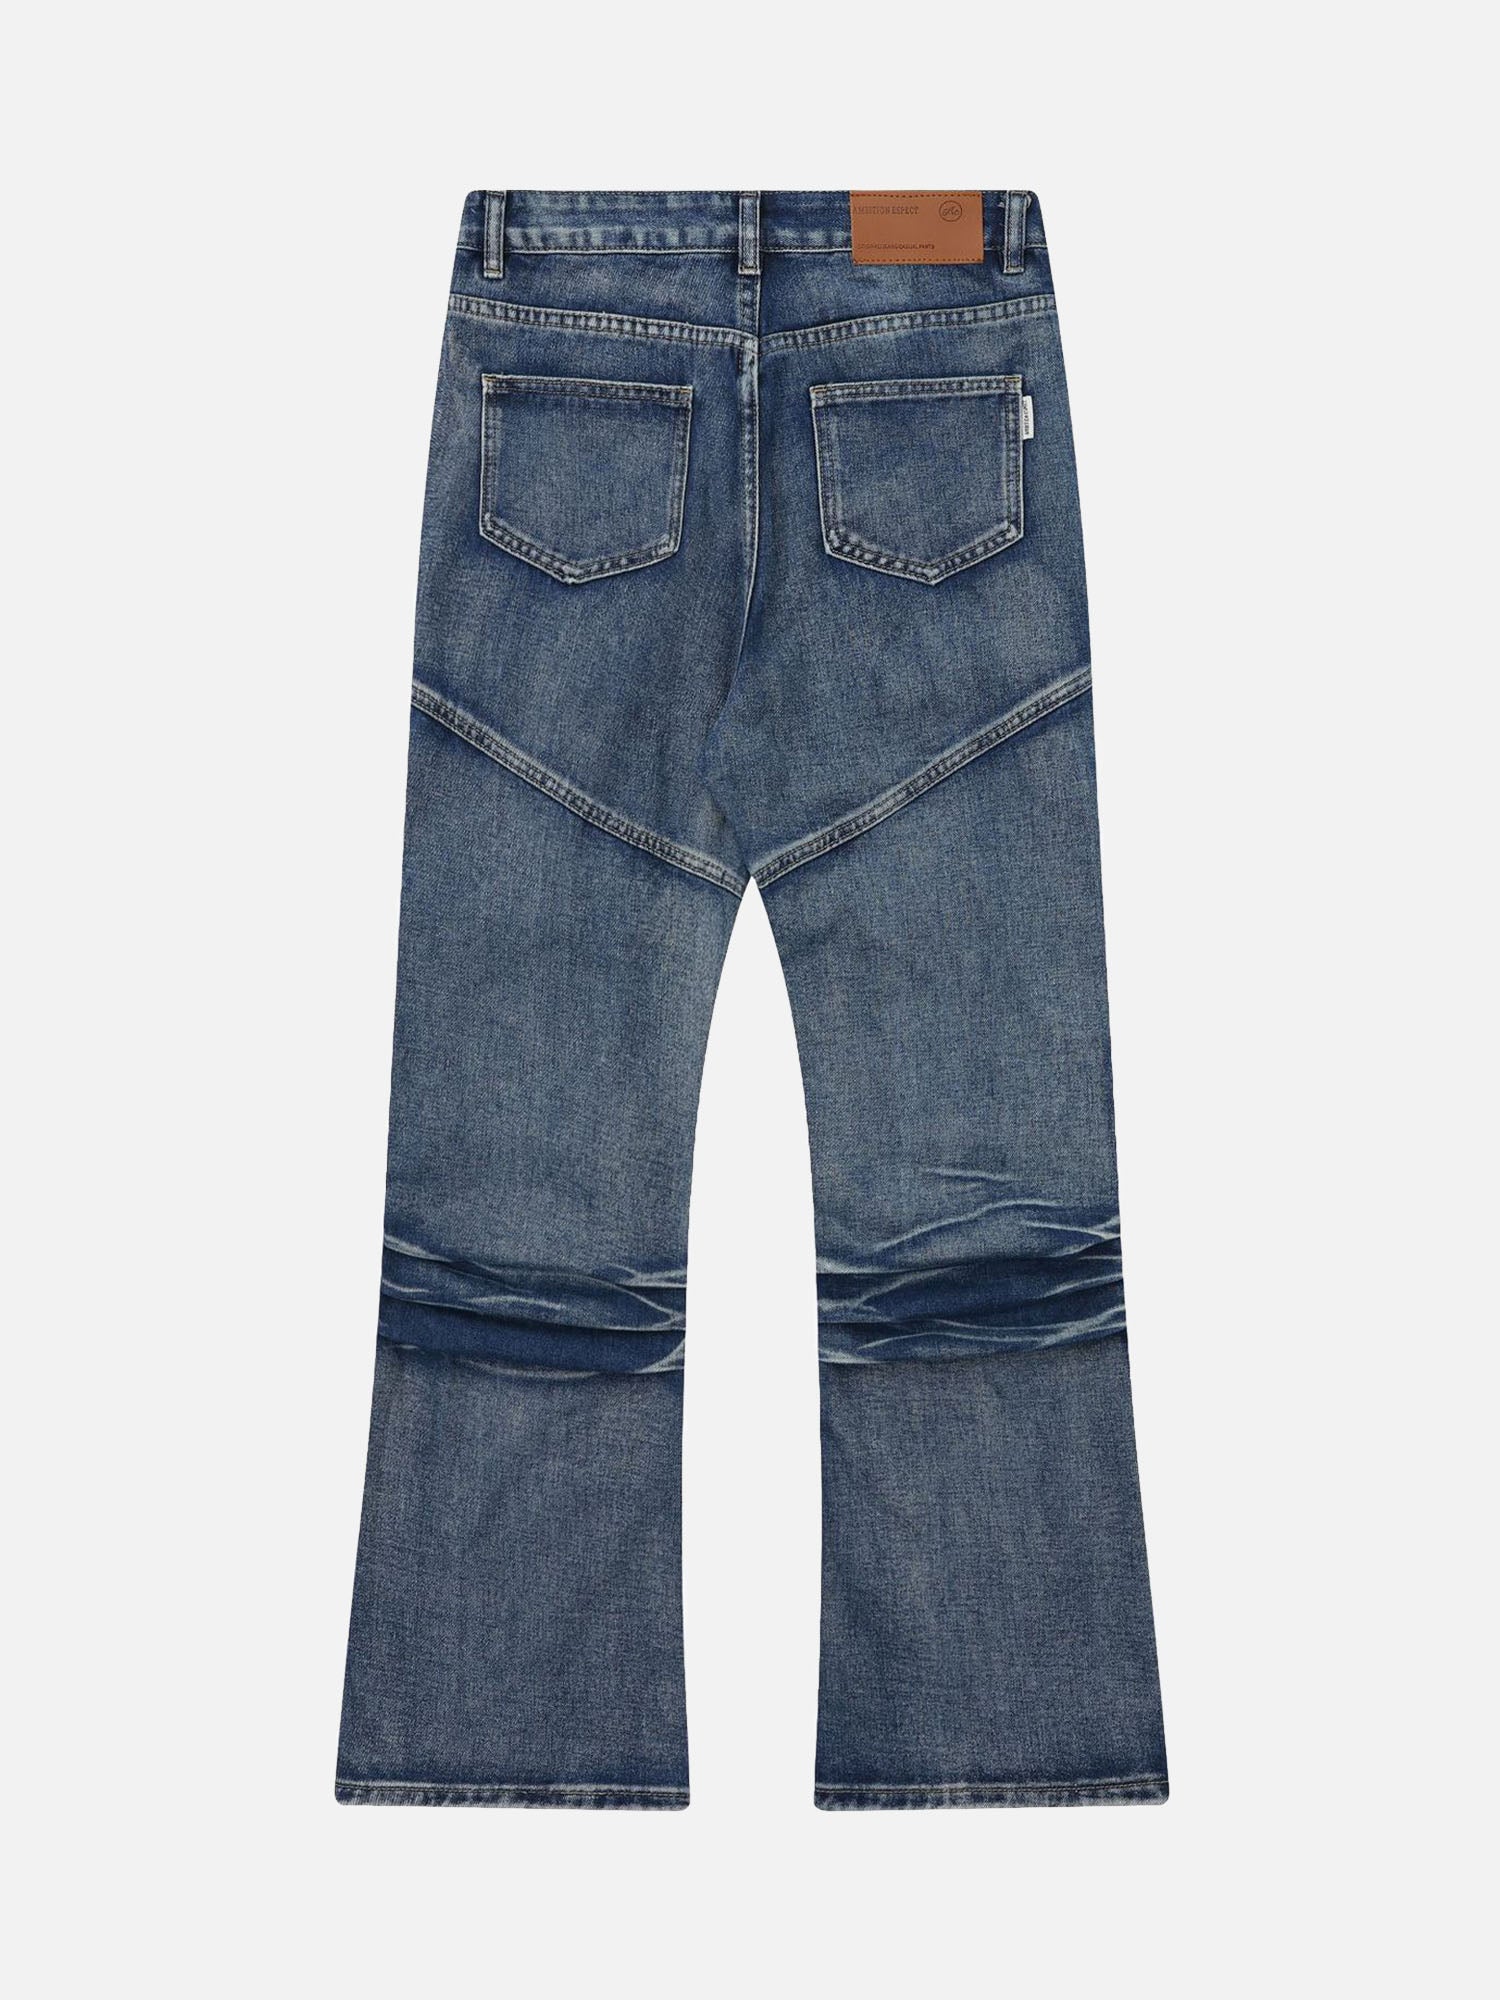 American Street Fashion Heavy Industry Washed Work Jeans